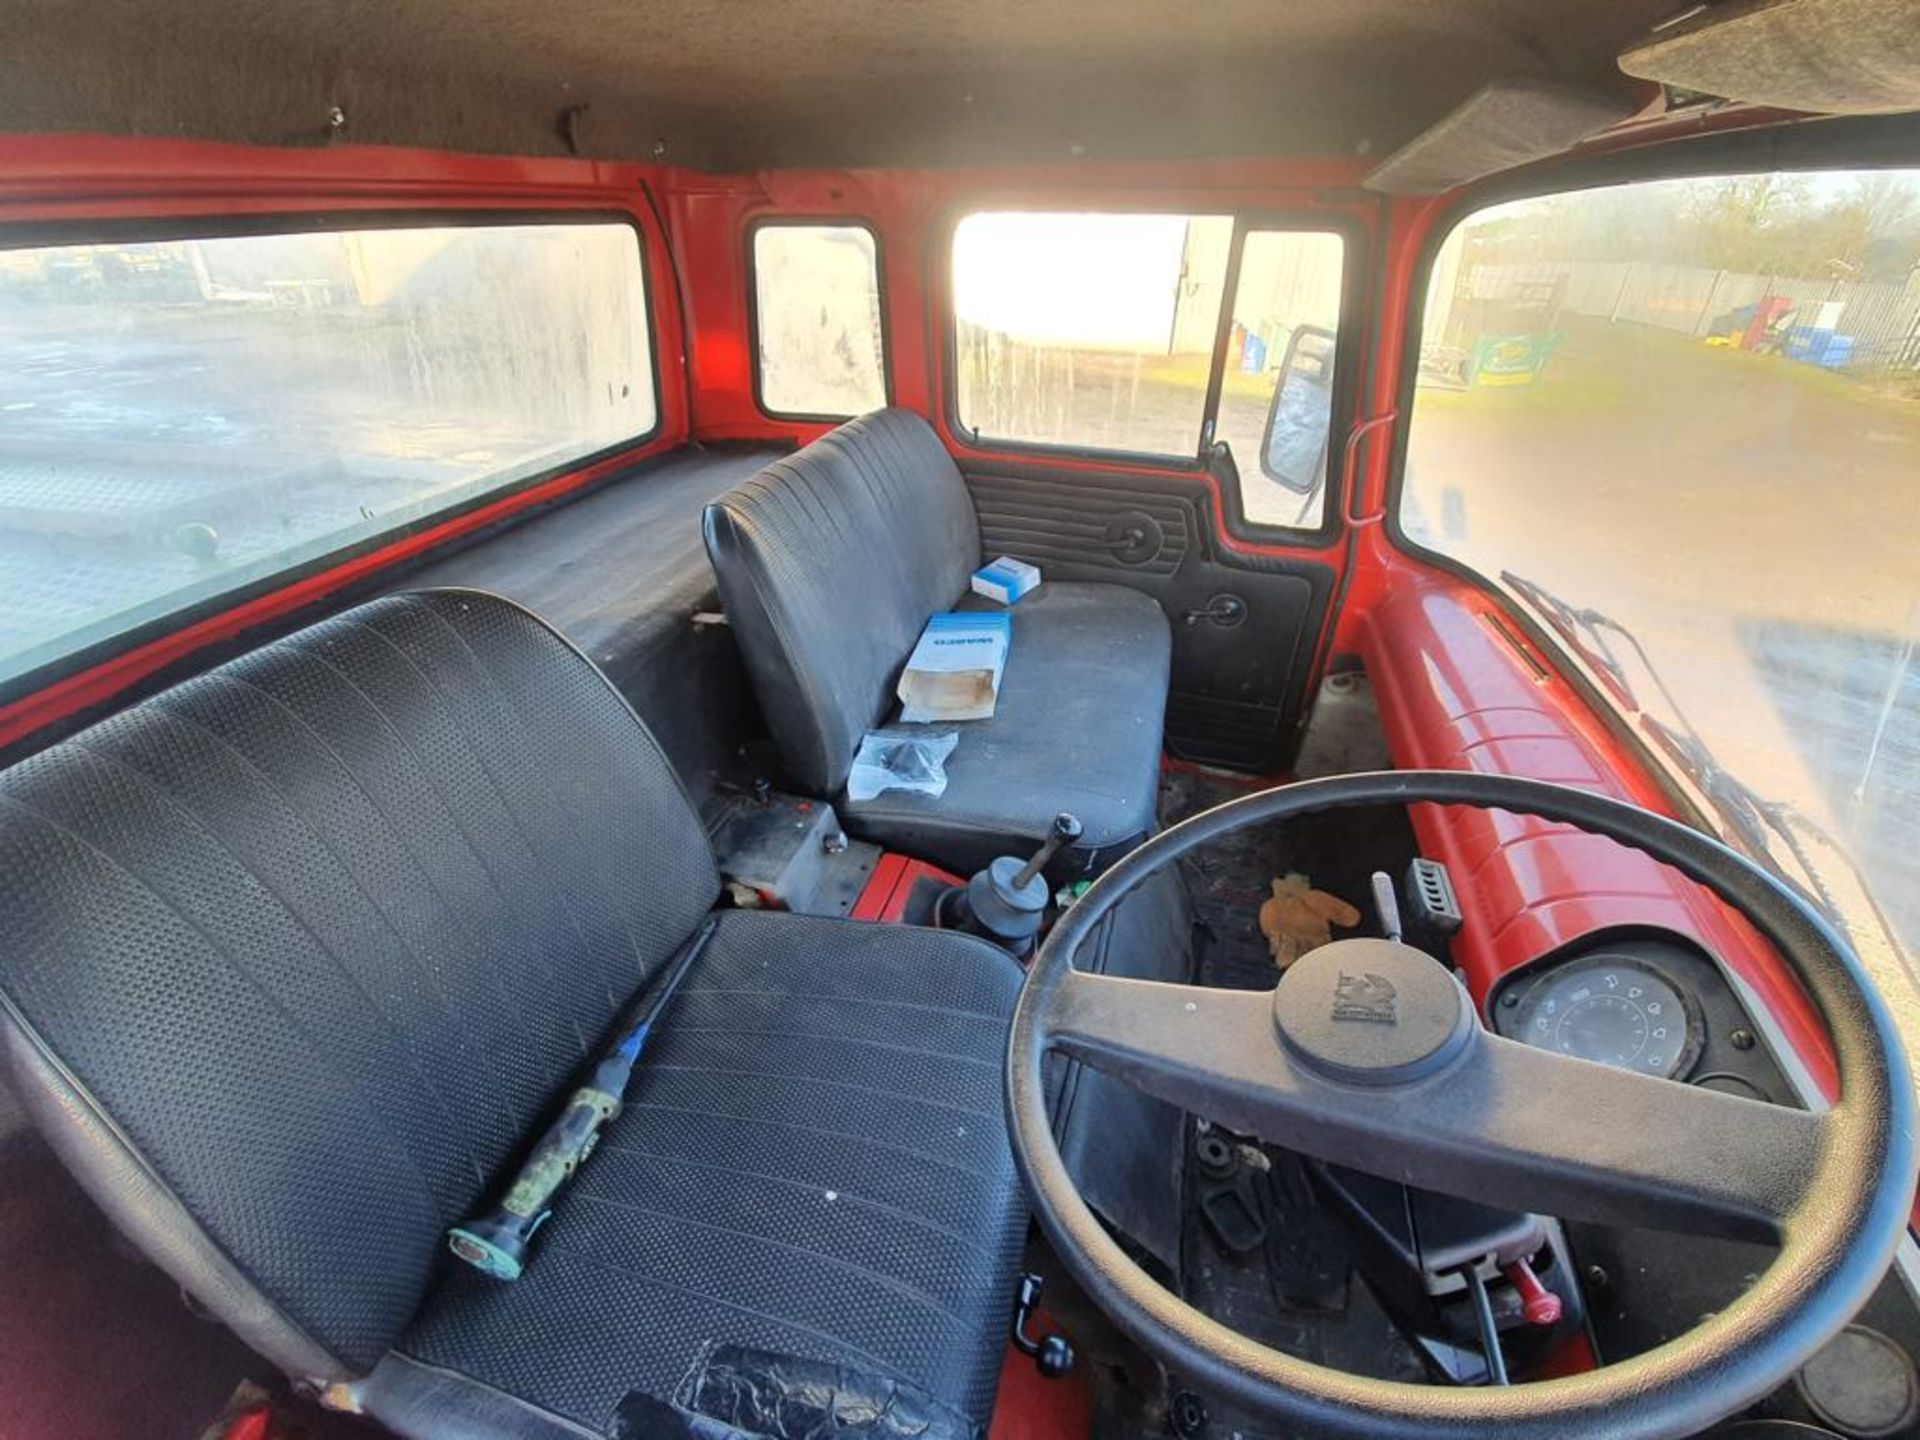 1978 BEDFORD TK RECOVERY TRUCK, STARTS AND DRIVES FINE *NO VAT* - Image 7 of 7